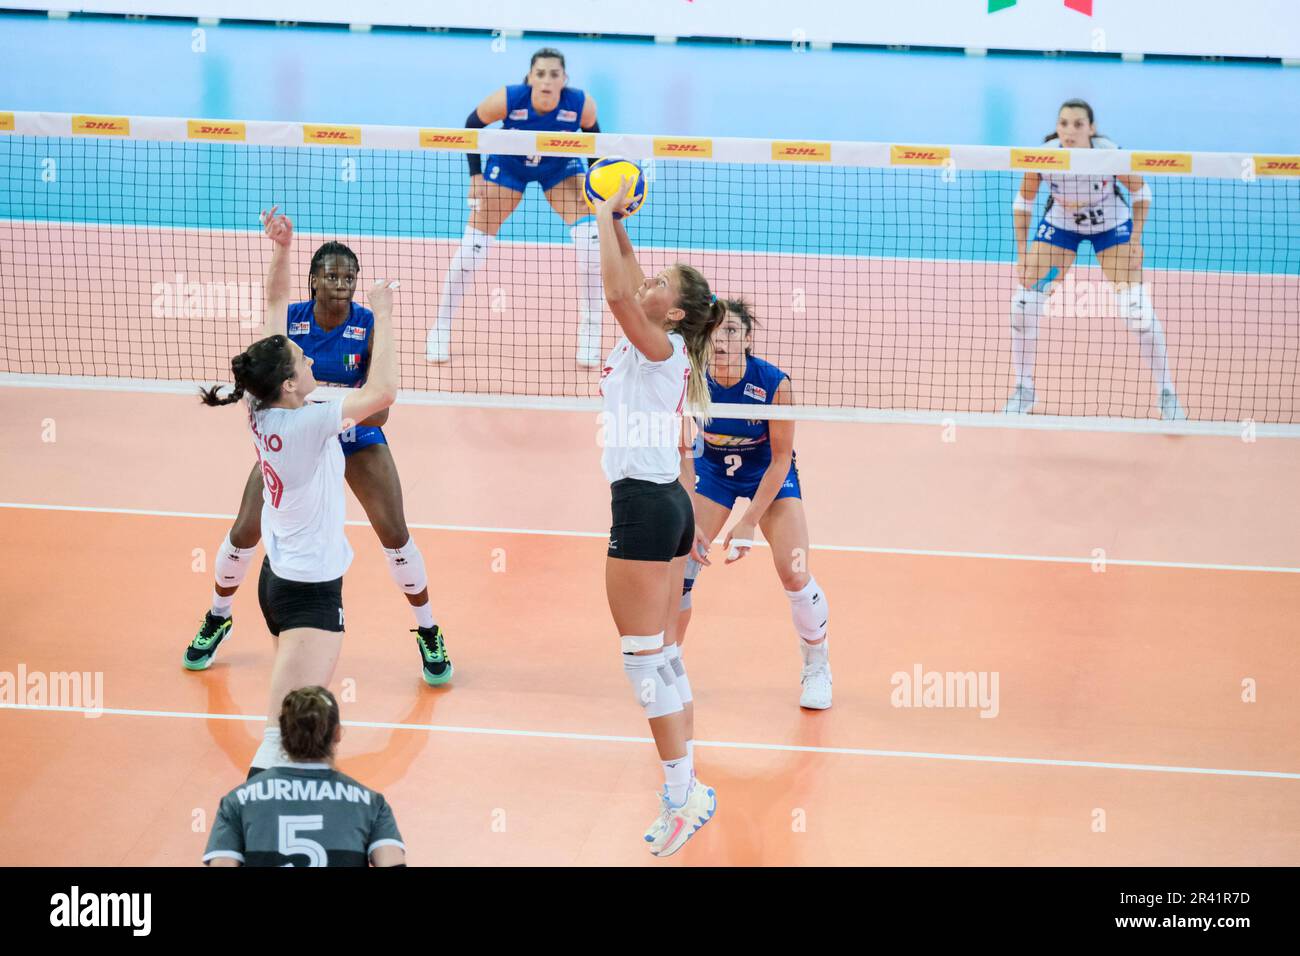 Hilary Howe (R) of Canada in action during the DHL Test Match Tournament women’s volleyball between Italy and Canada at Palazzetto dello Sport. Final score; Italy 3:1 Canada. Stock Photo